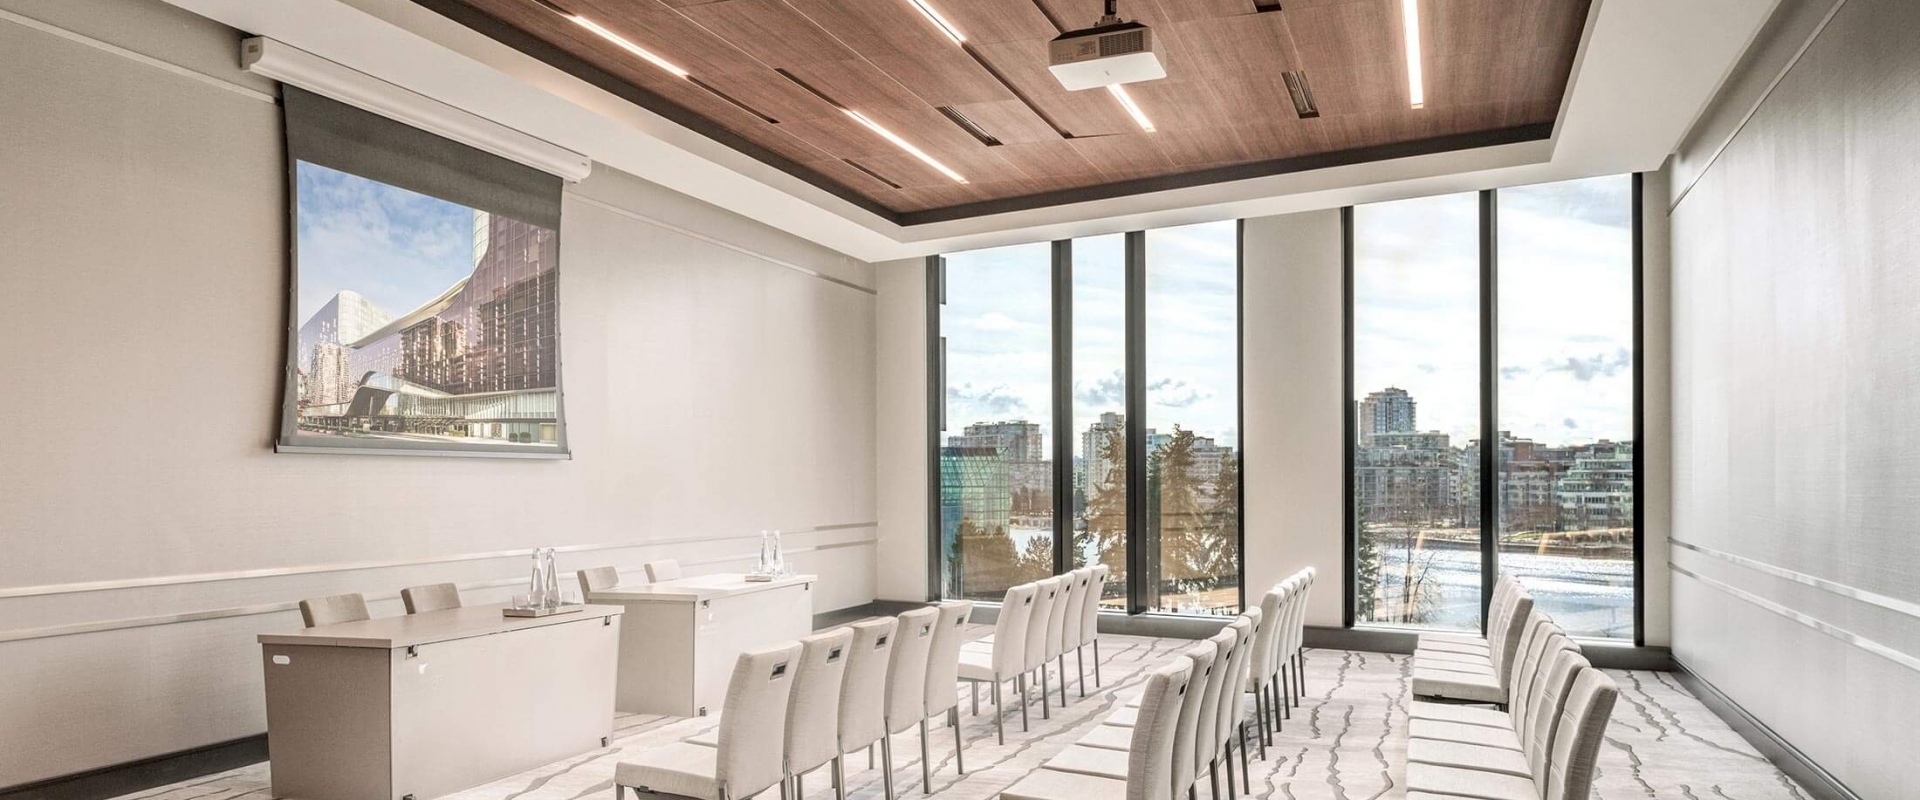 Stanley meeting room at Parq Vancouver with stunning city views